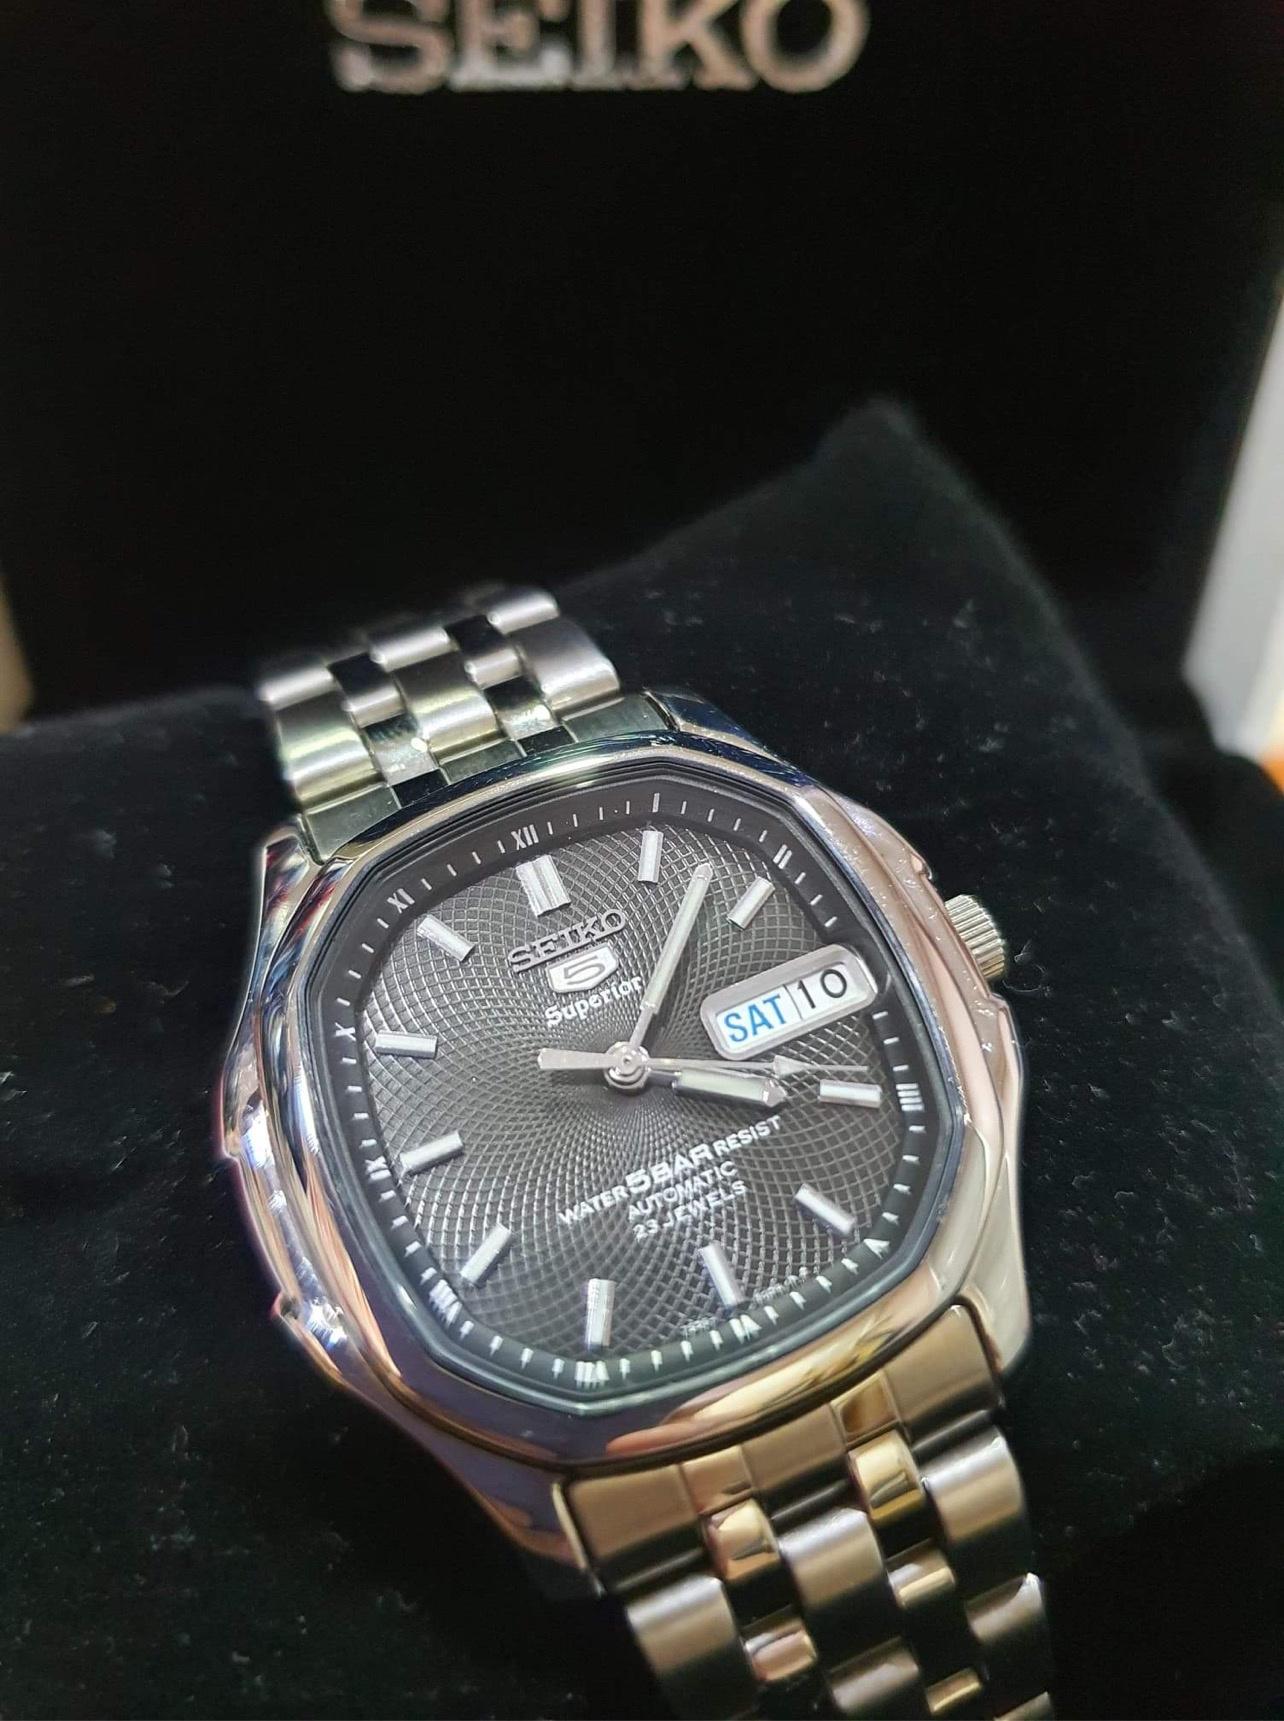 WTS] Seiko Superior Whirlpool dial | WatchCharts